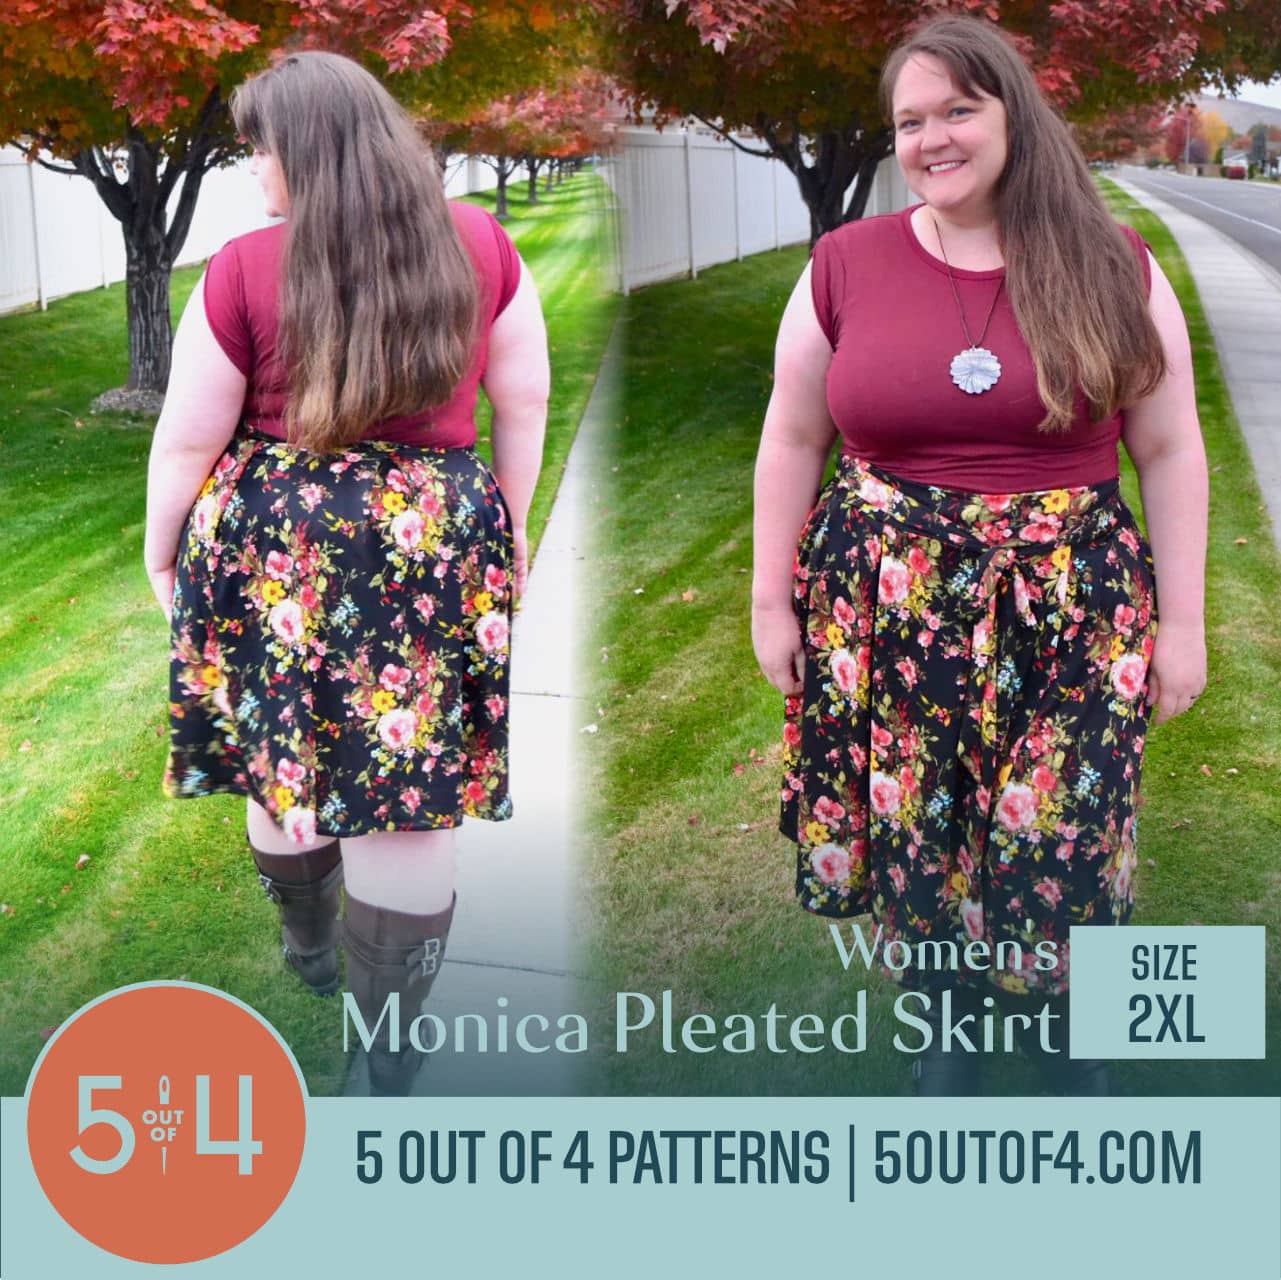 5 out of 4 Women's Monica Pleated Skirt PDF Pattern Instant Download